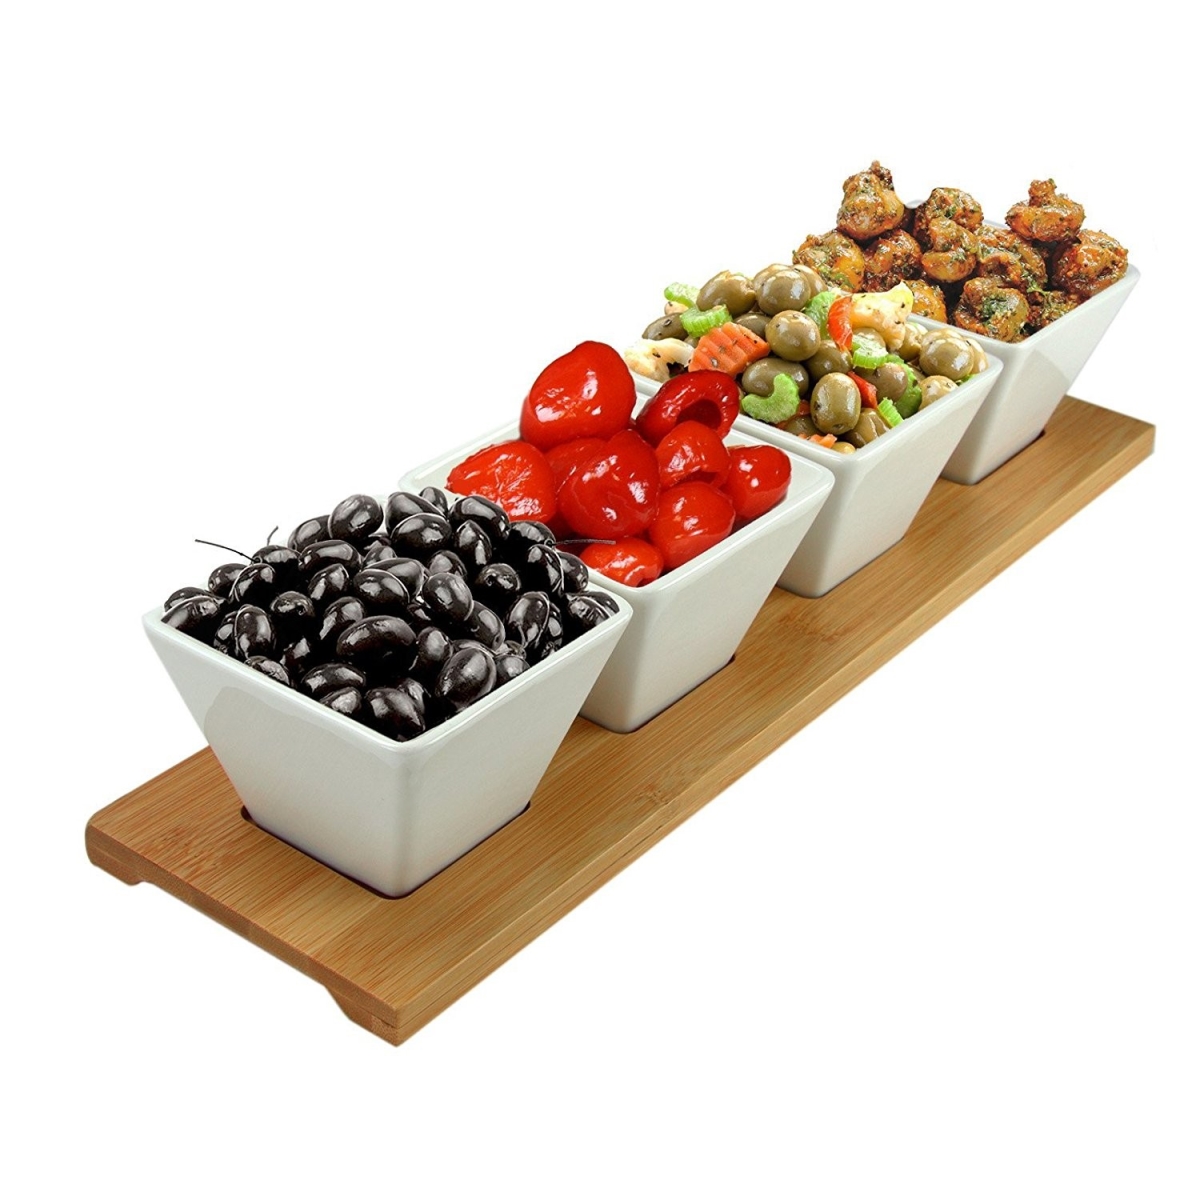 El-232 Modern Appetizer & Condiment Server With 4 Serving Dishes & A Bamboo Serving Block - 5 Piece